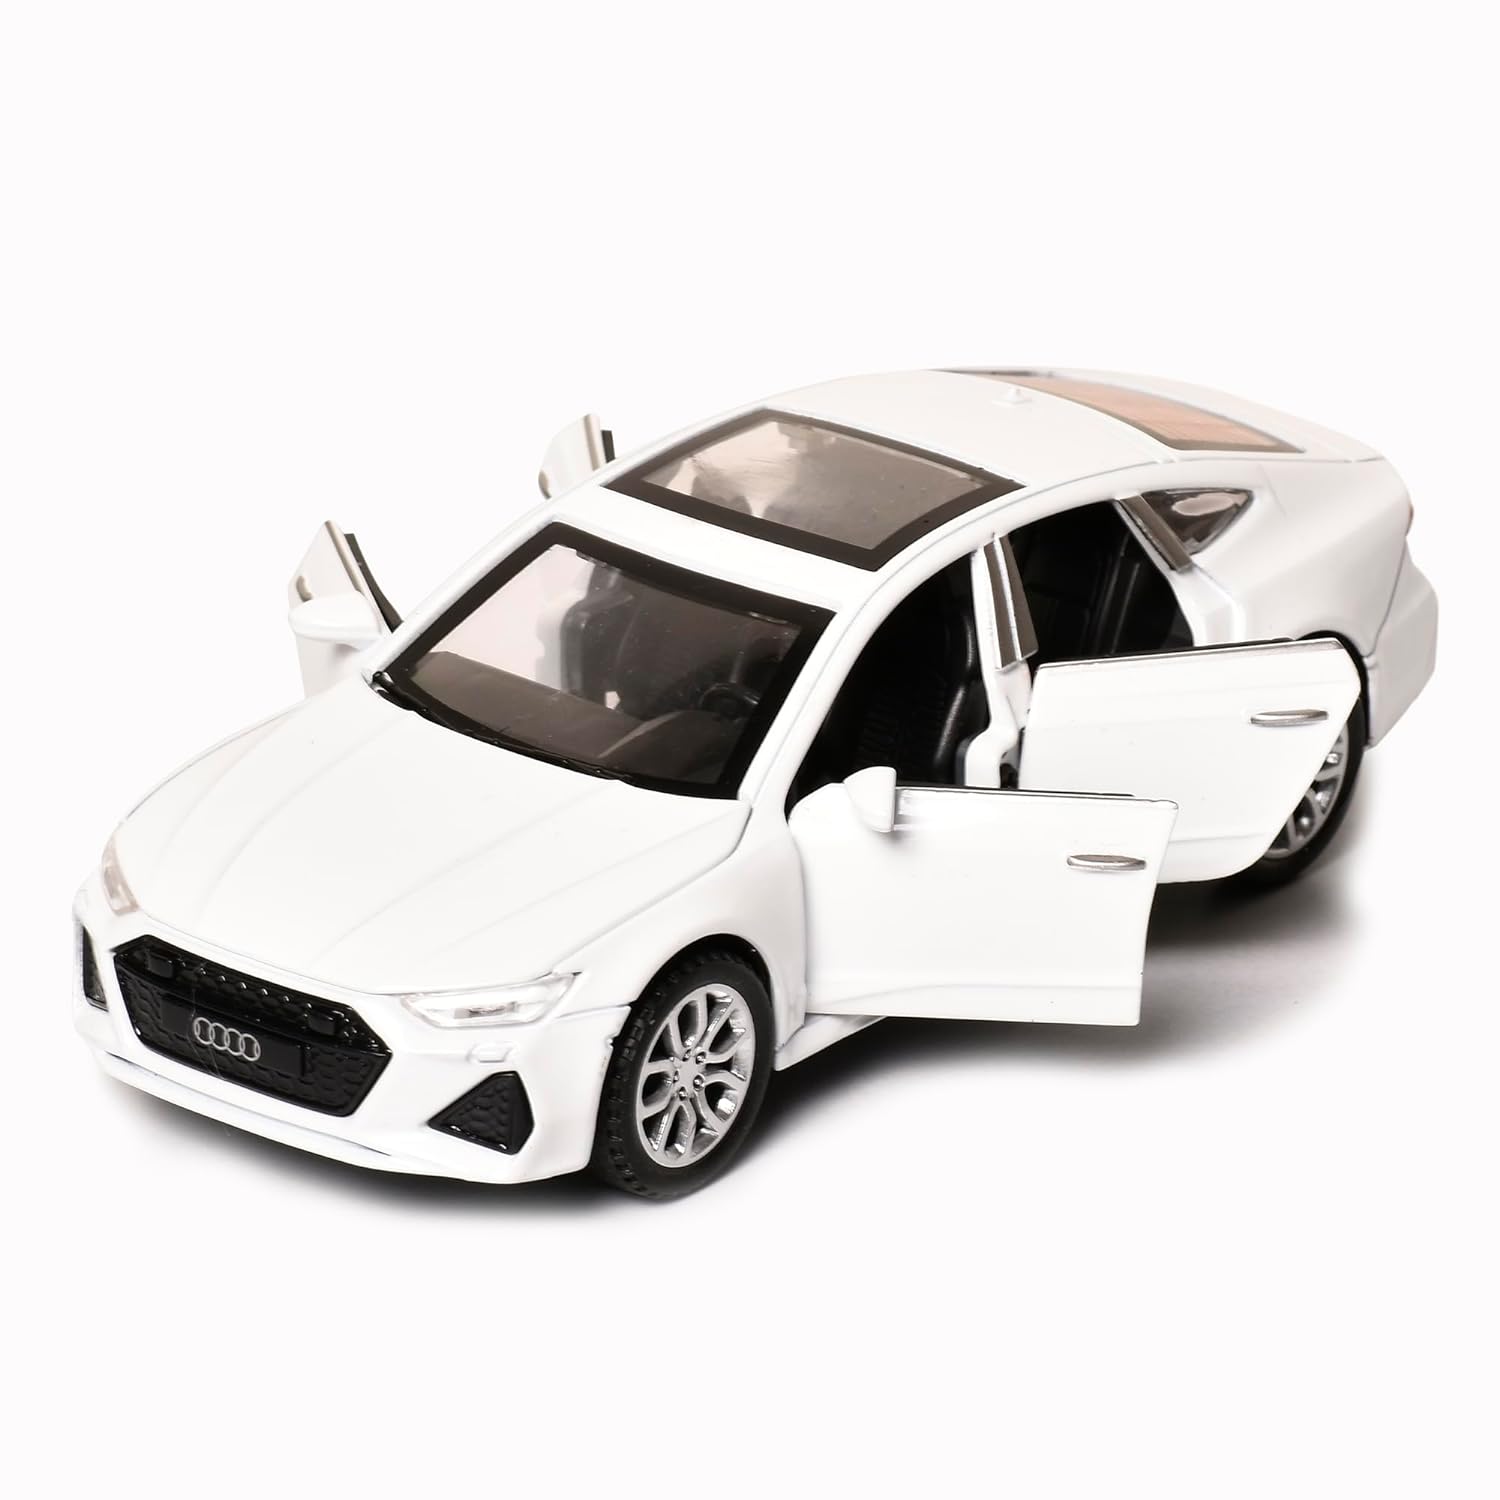 Braintastic Model Diecast Car Toy Vehicle Pull Back Friction Car with Openable Doors Light & Music Toys for Kids Age 3+ Years (AK Metal Series Audi White)